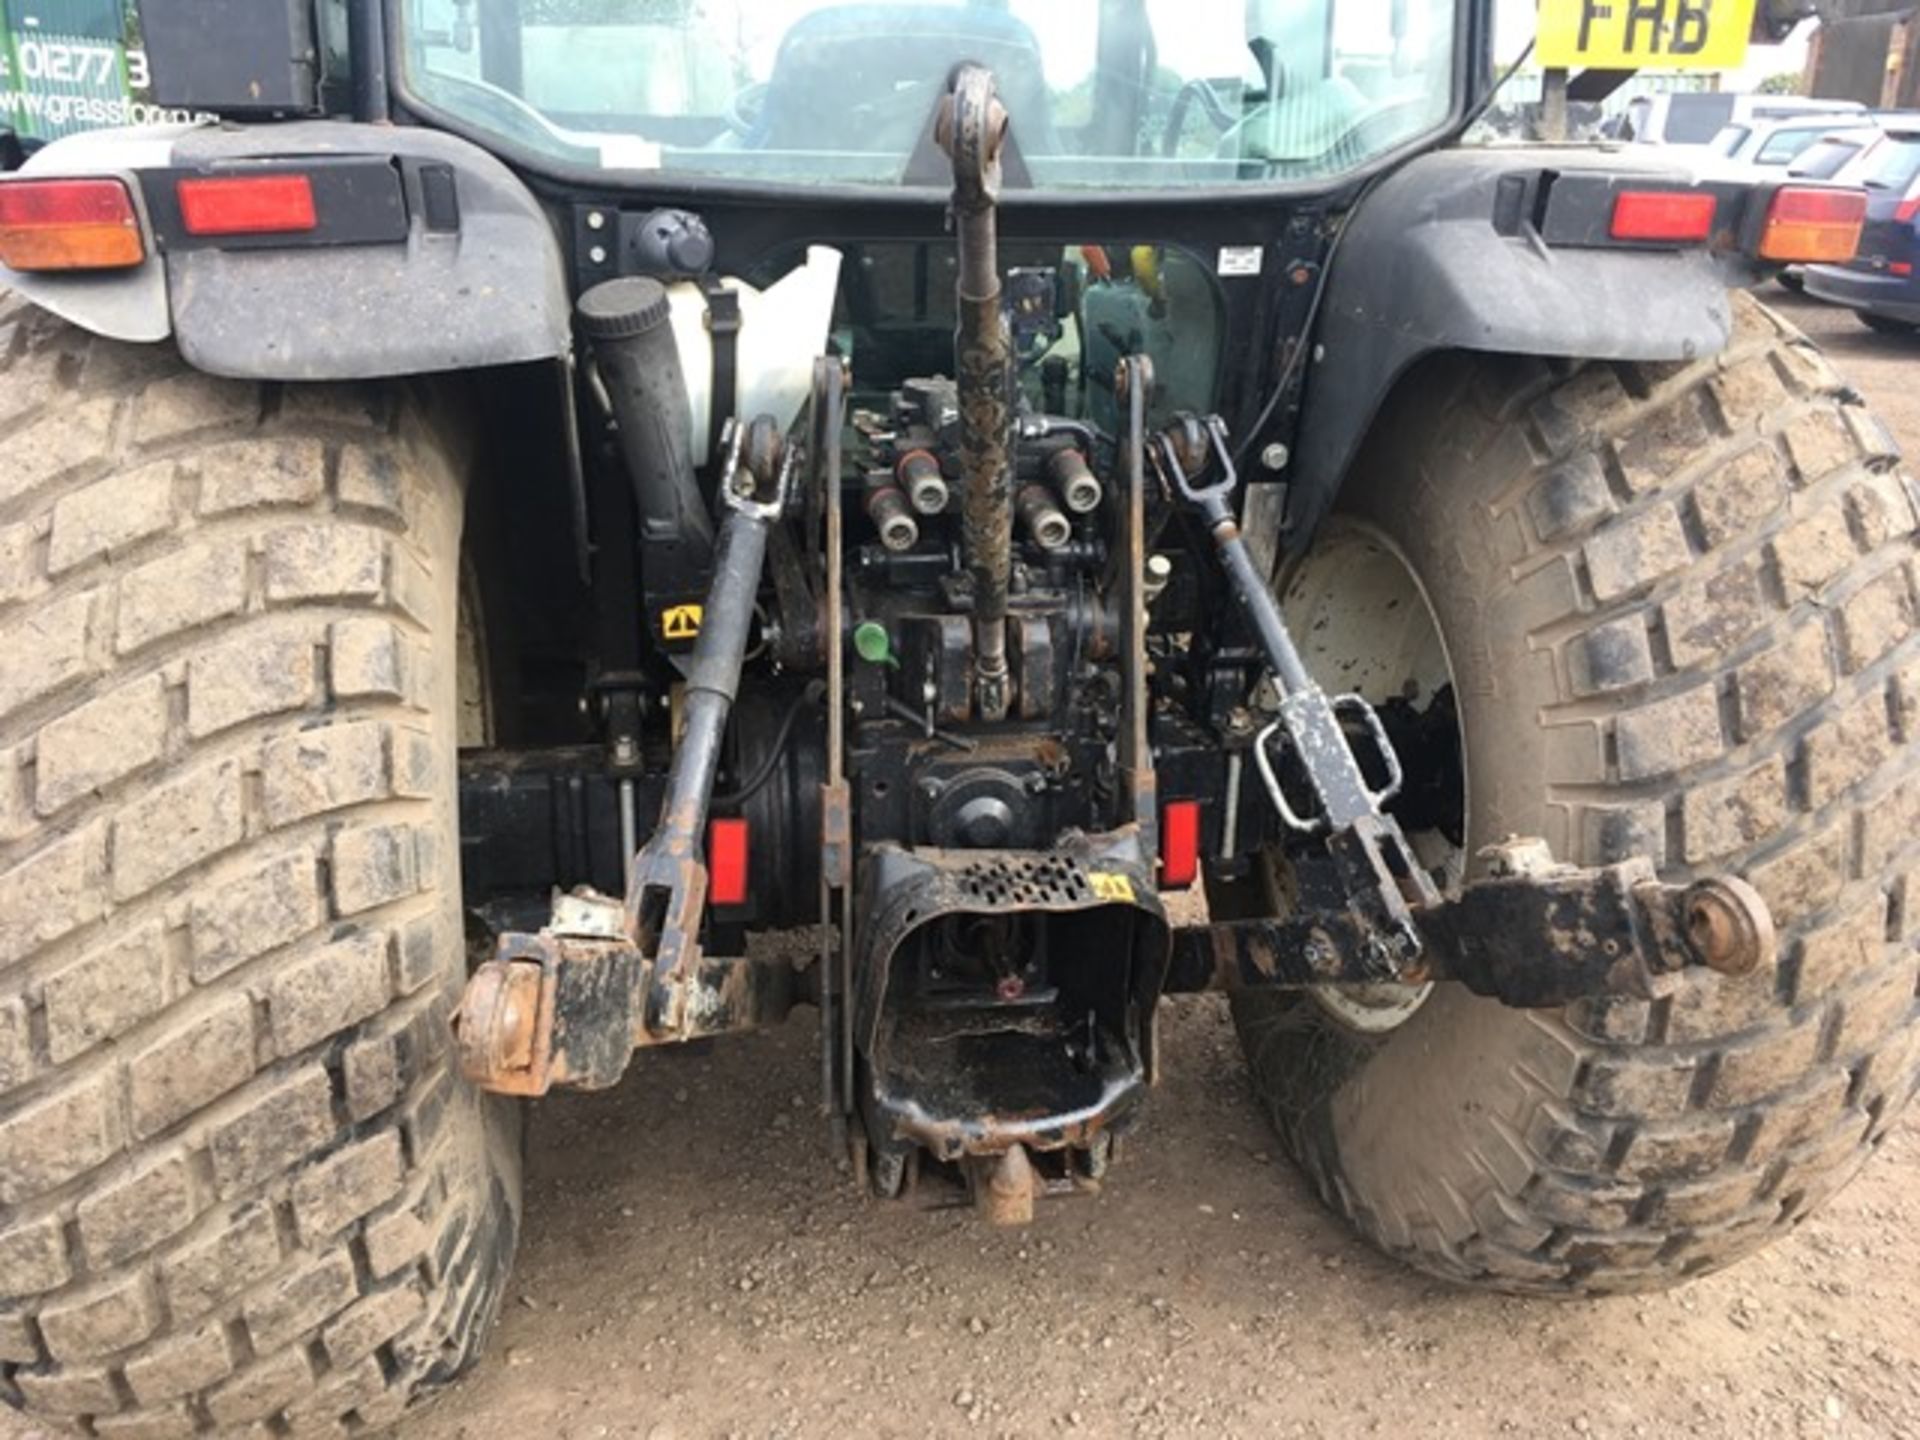 New Holland T4020 tractor fitted with grassland tyres, creep speed gear box, 2 no. exterior - Image 9 of 11